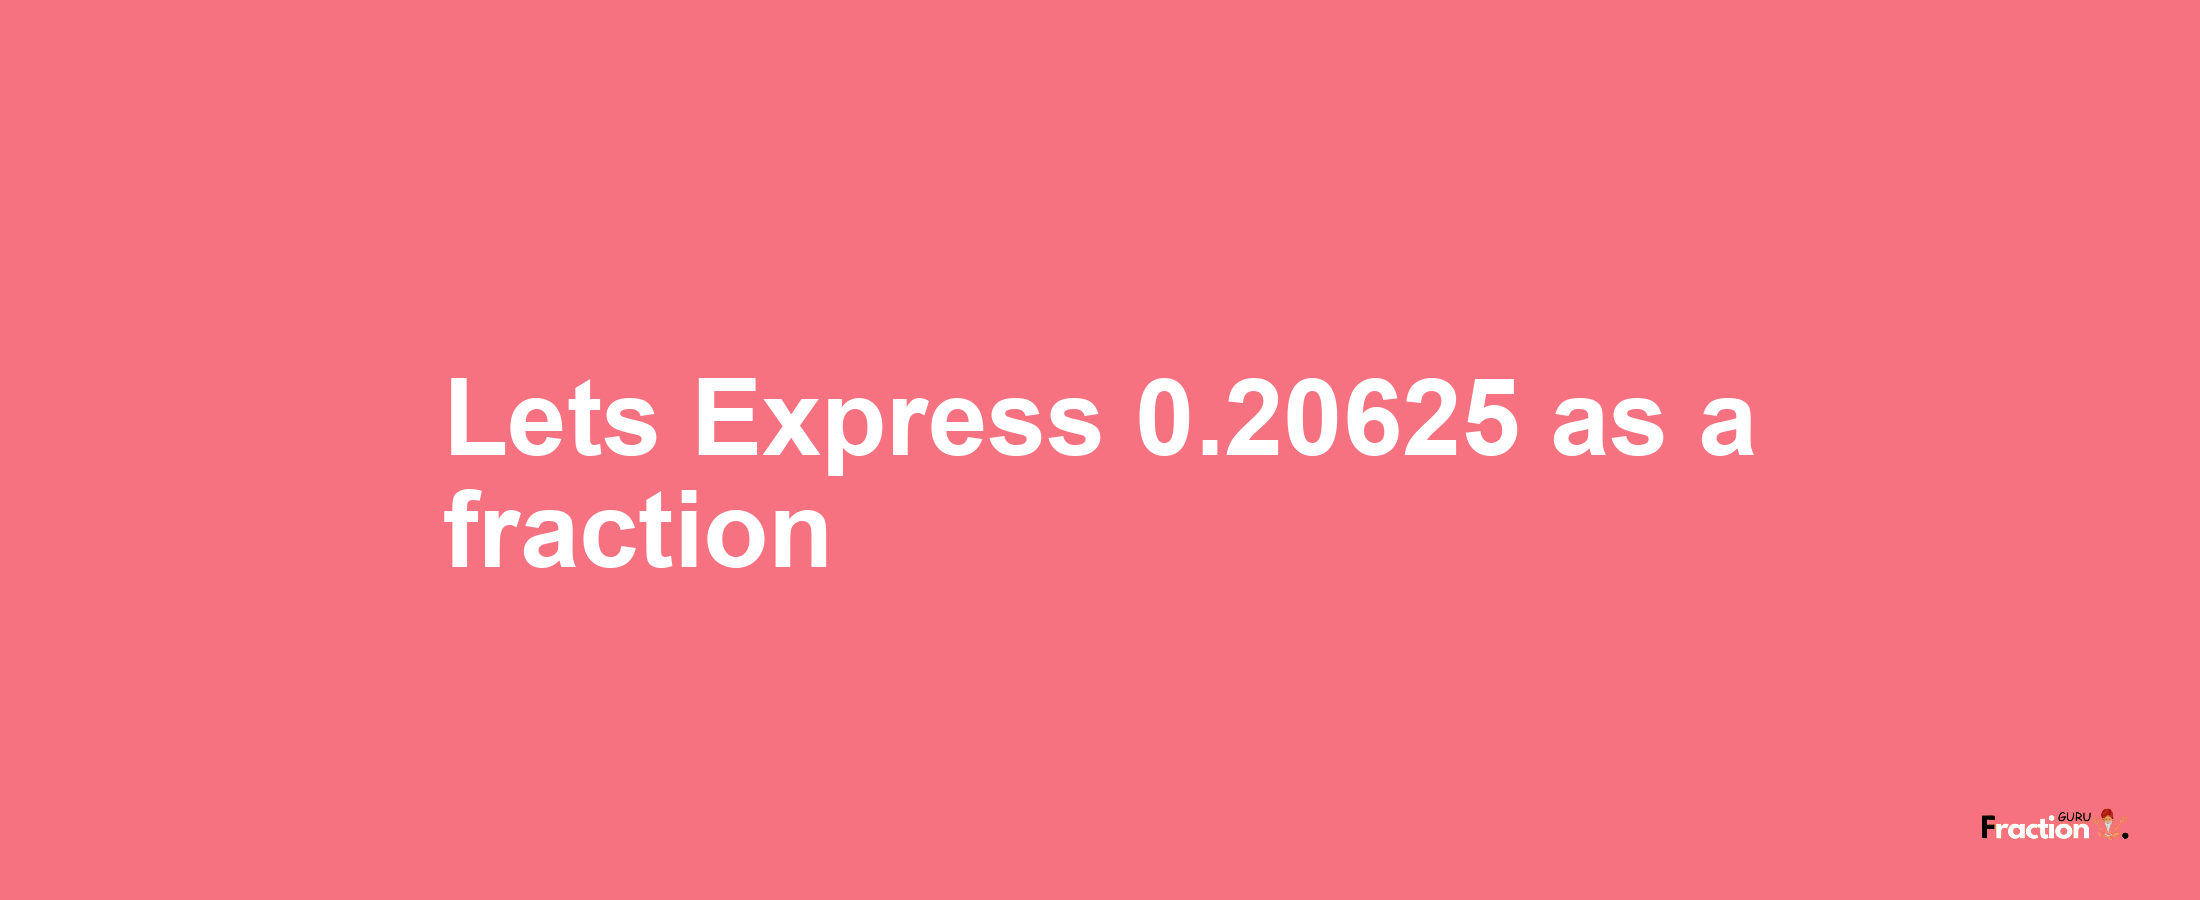 Lets Express 0.20625 as afraction